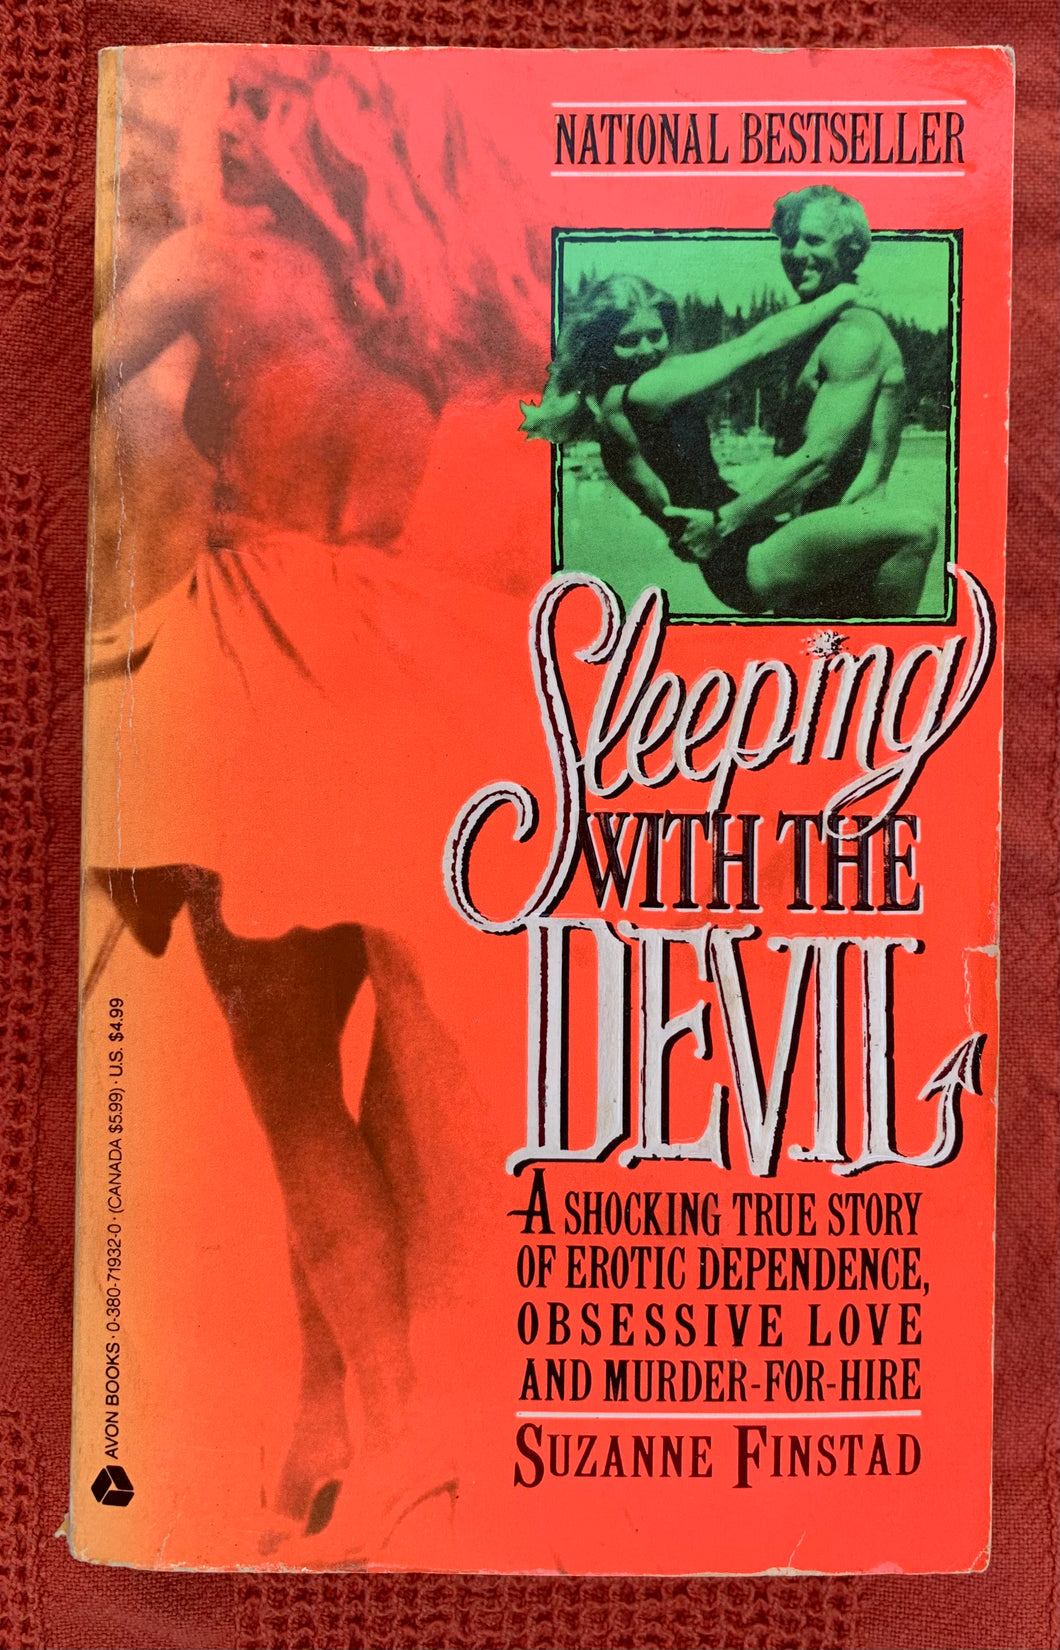 Sleeping with the Devil: A Shocking True Story of Erotic Dependence, Obsessive Love and Murder-For-Hire